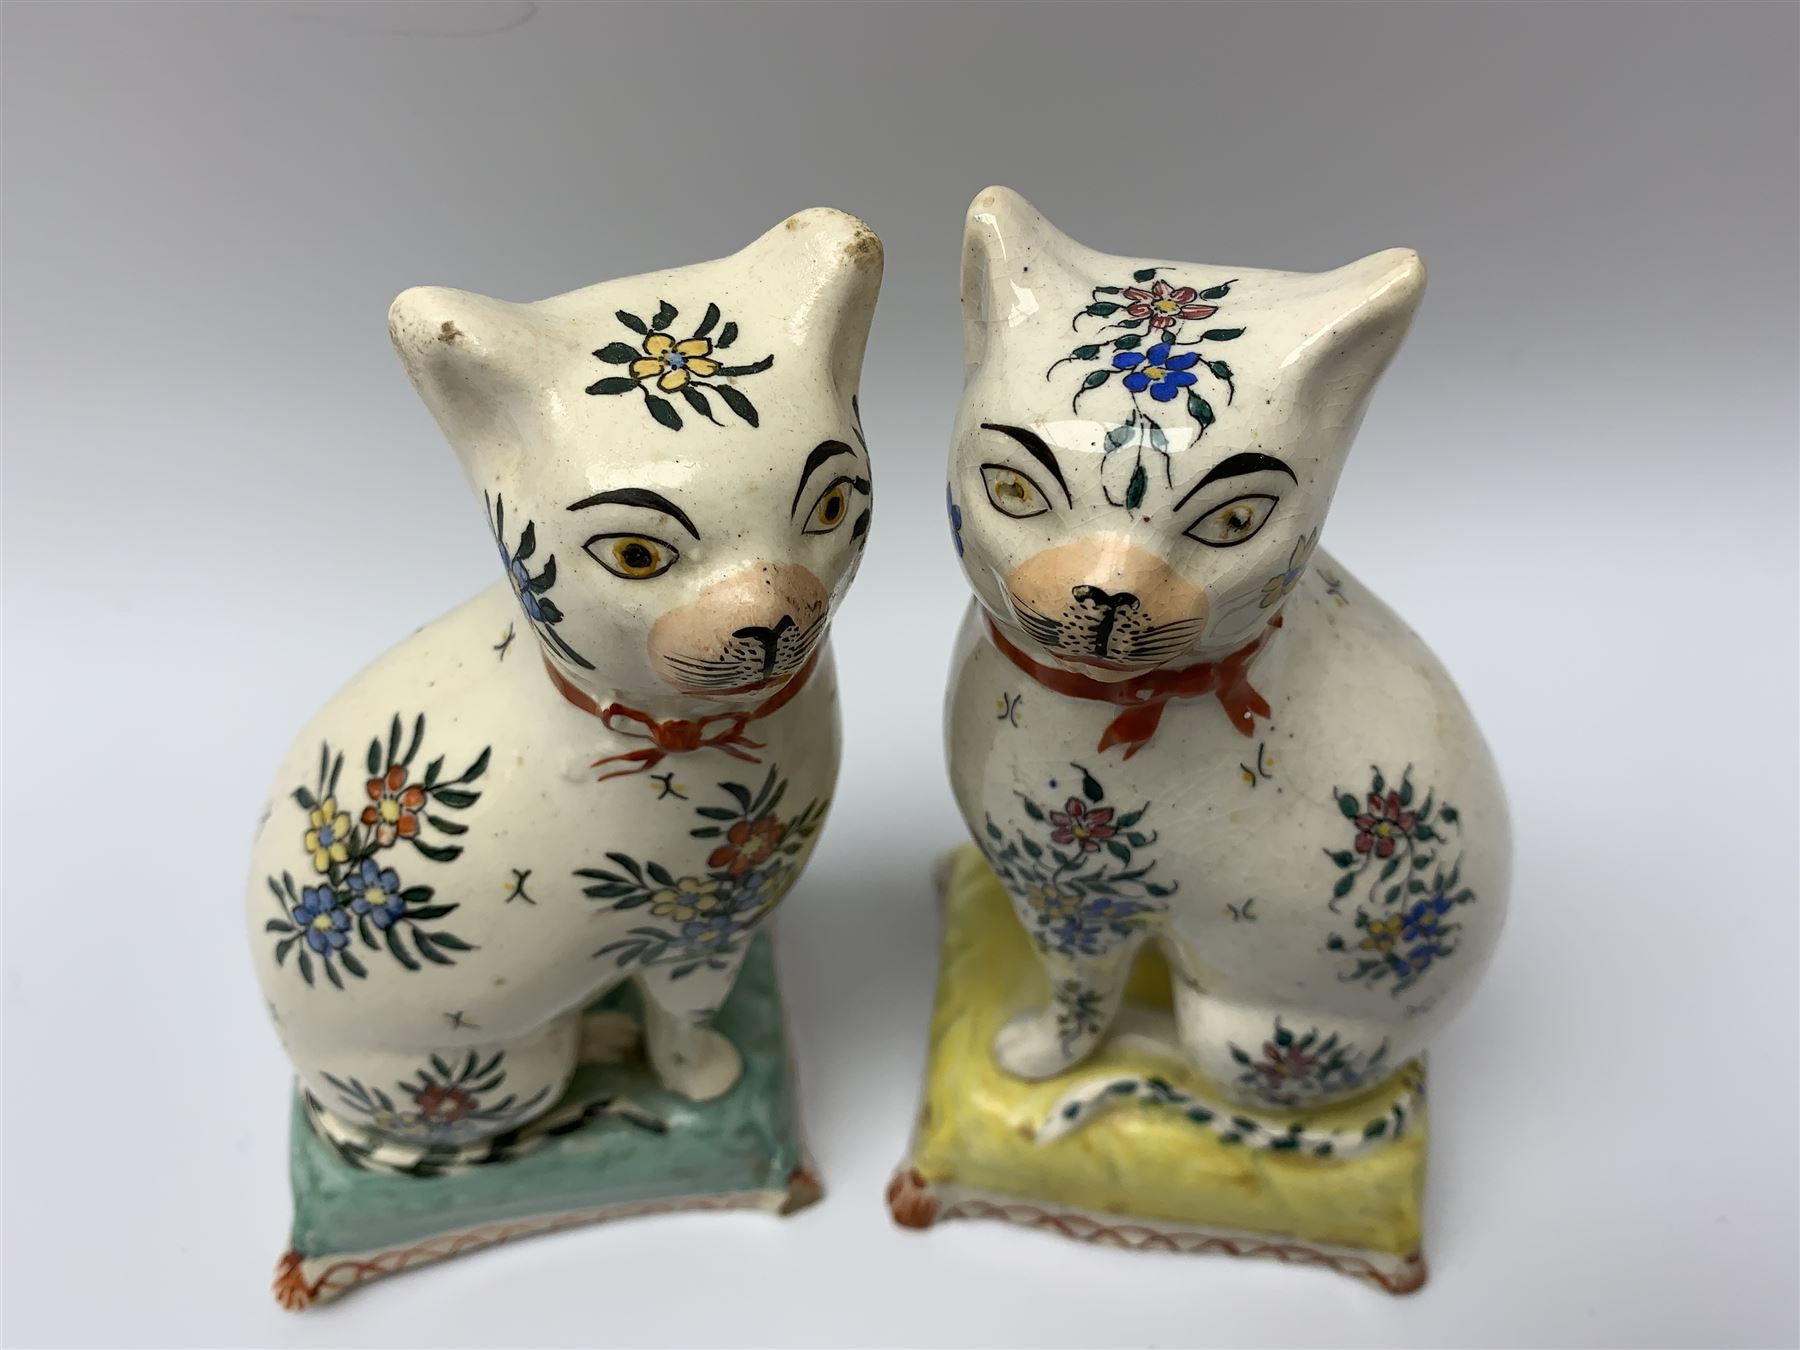 Pair of 19th century Staffordshire cats - Image 2 of 6